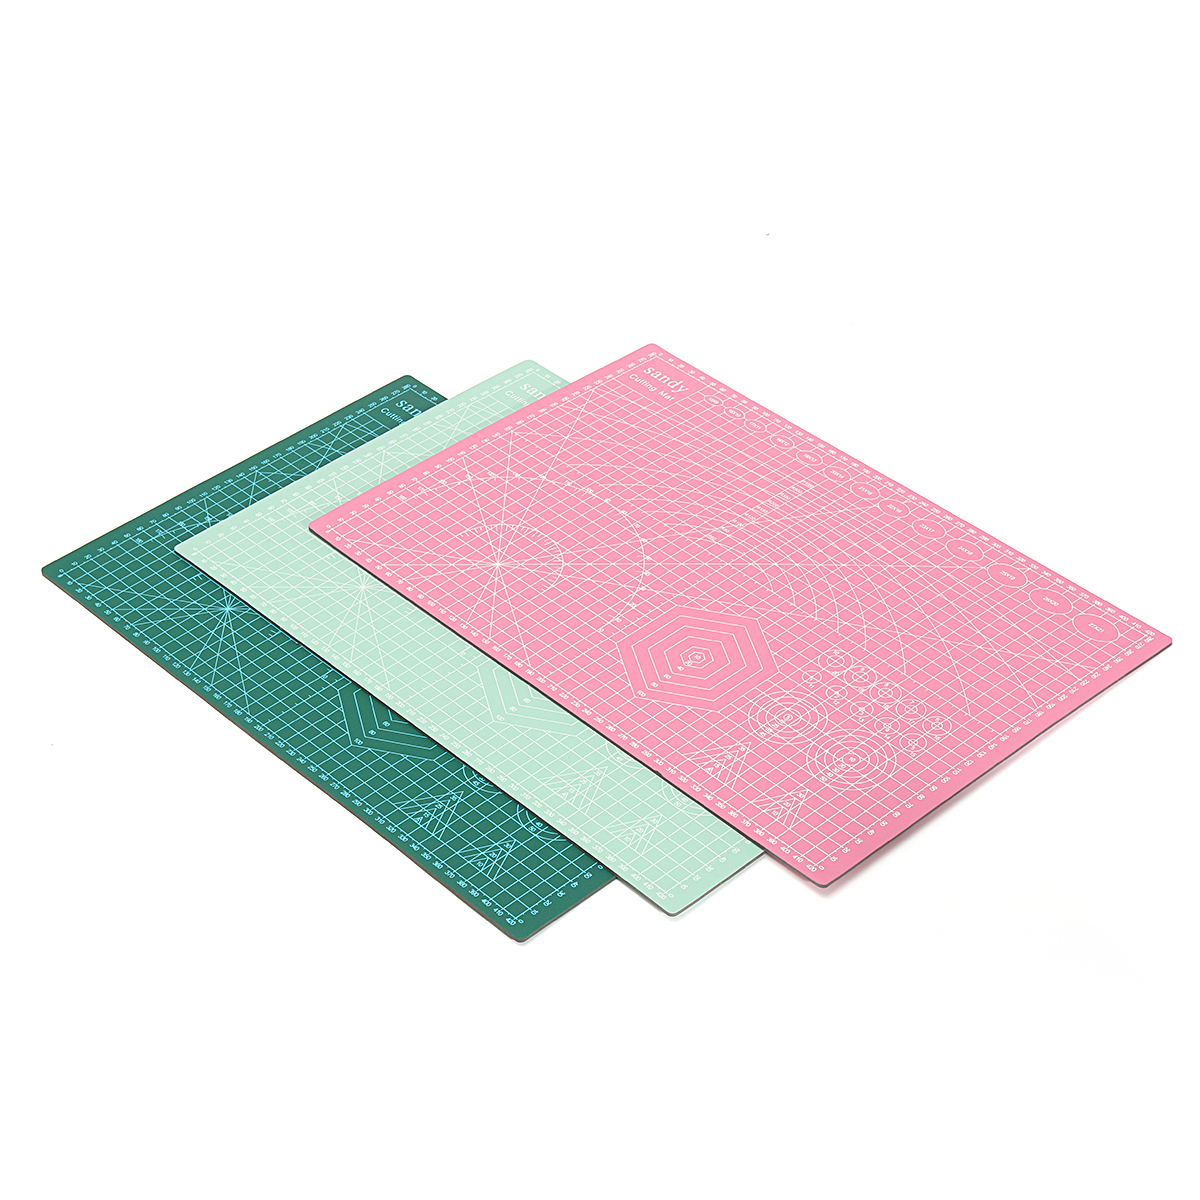 Suleve?„? CM01 A3 PVC Cutting Mat Eco Self Healing Colorful for Craft DIY 450x300x2.5mm 2